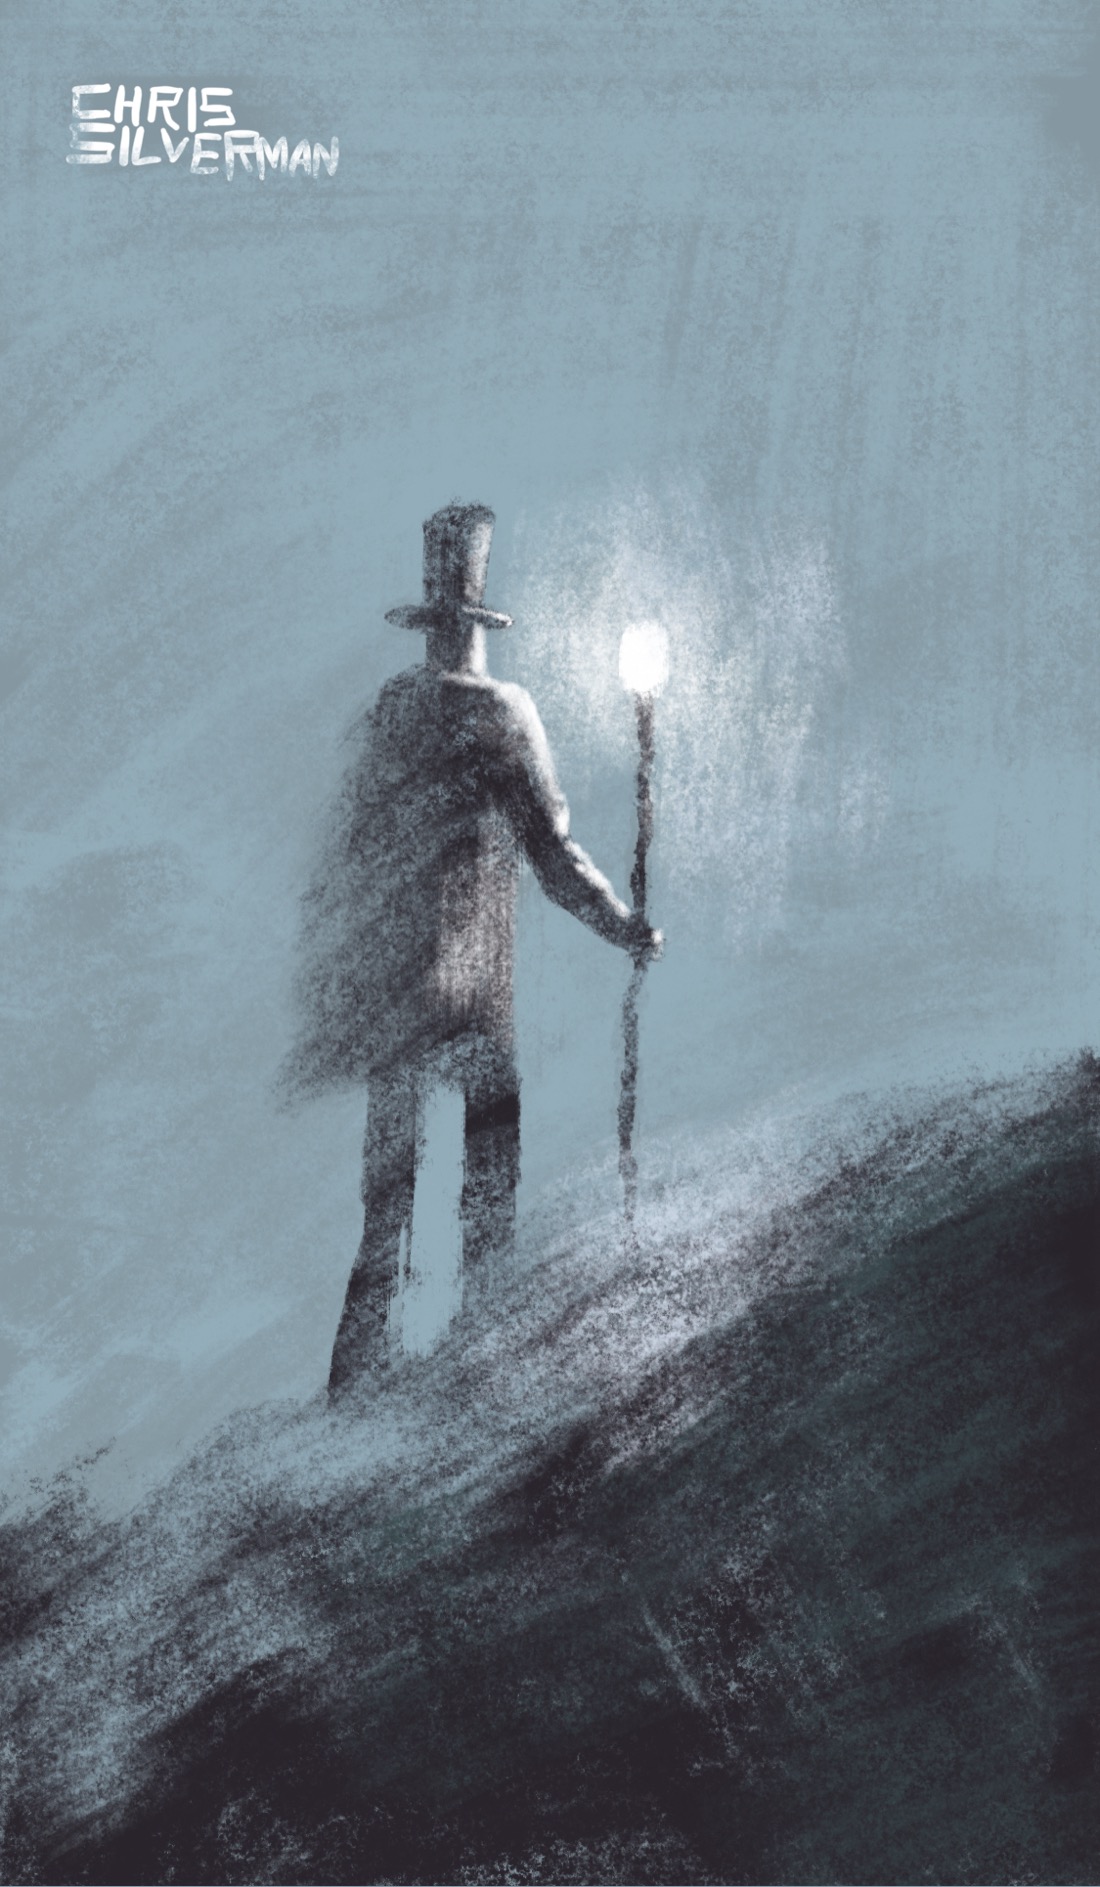 A tall, gaunt figure with a top hat walks on a barren hill at night. The figure is holding a staff in its right hand, with a glowing lantern mounted at the top of the staff. The drawing is mostly dull-blue and black. The lantern is white.